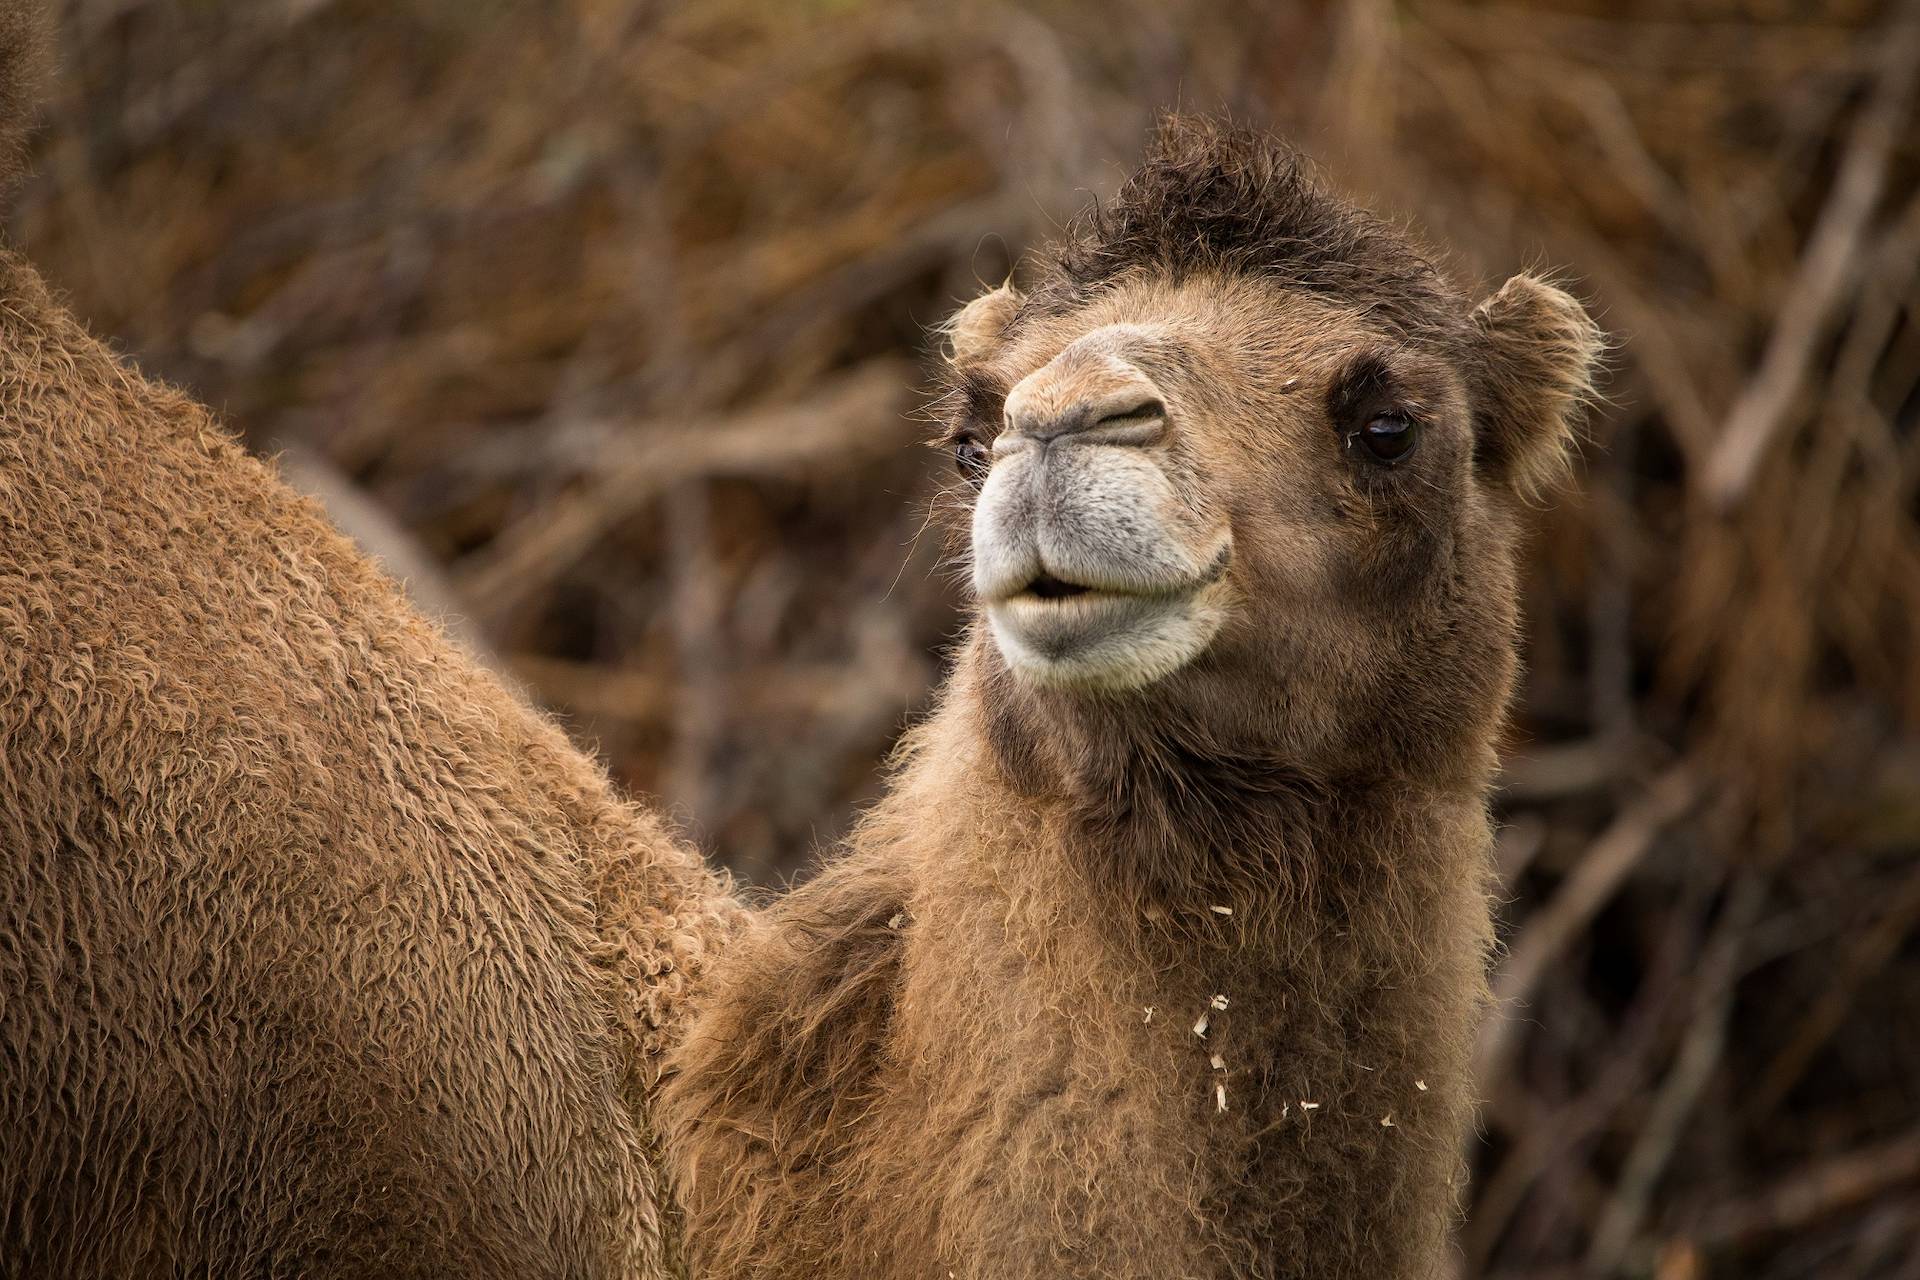 Bactrian camel looking to the left IMAGE: Sian Addison 2019